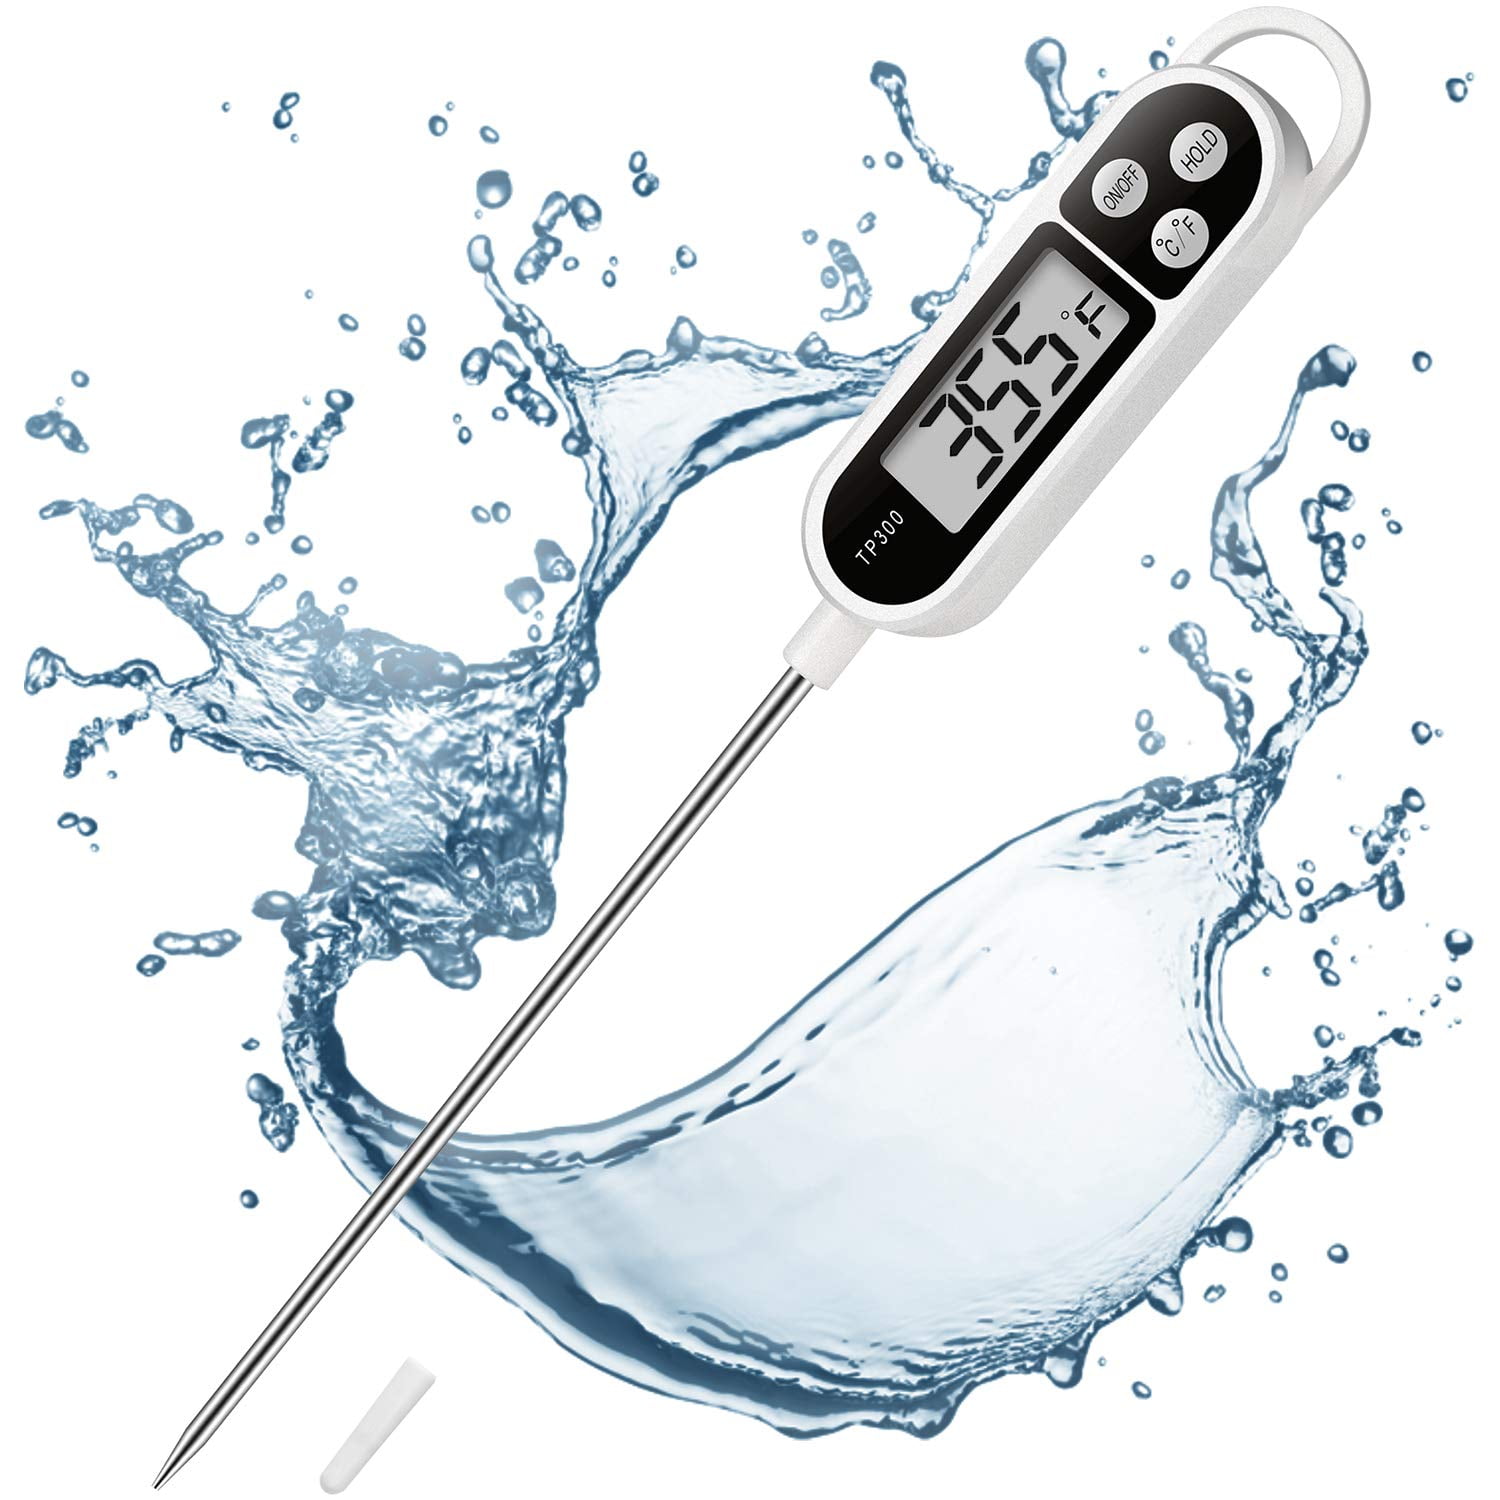 Digital Meat Thermometer - Single